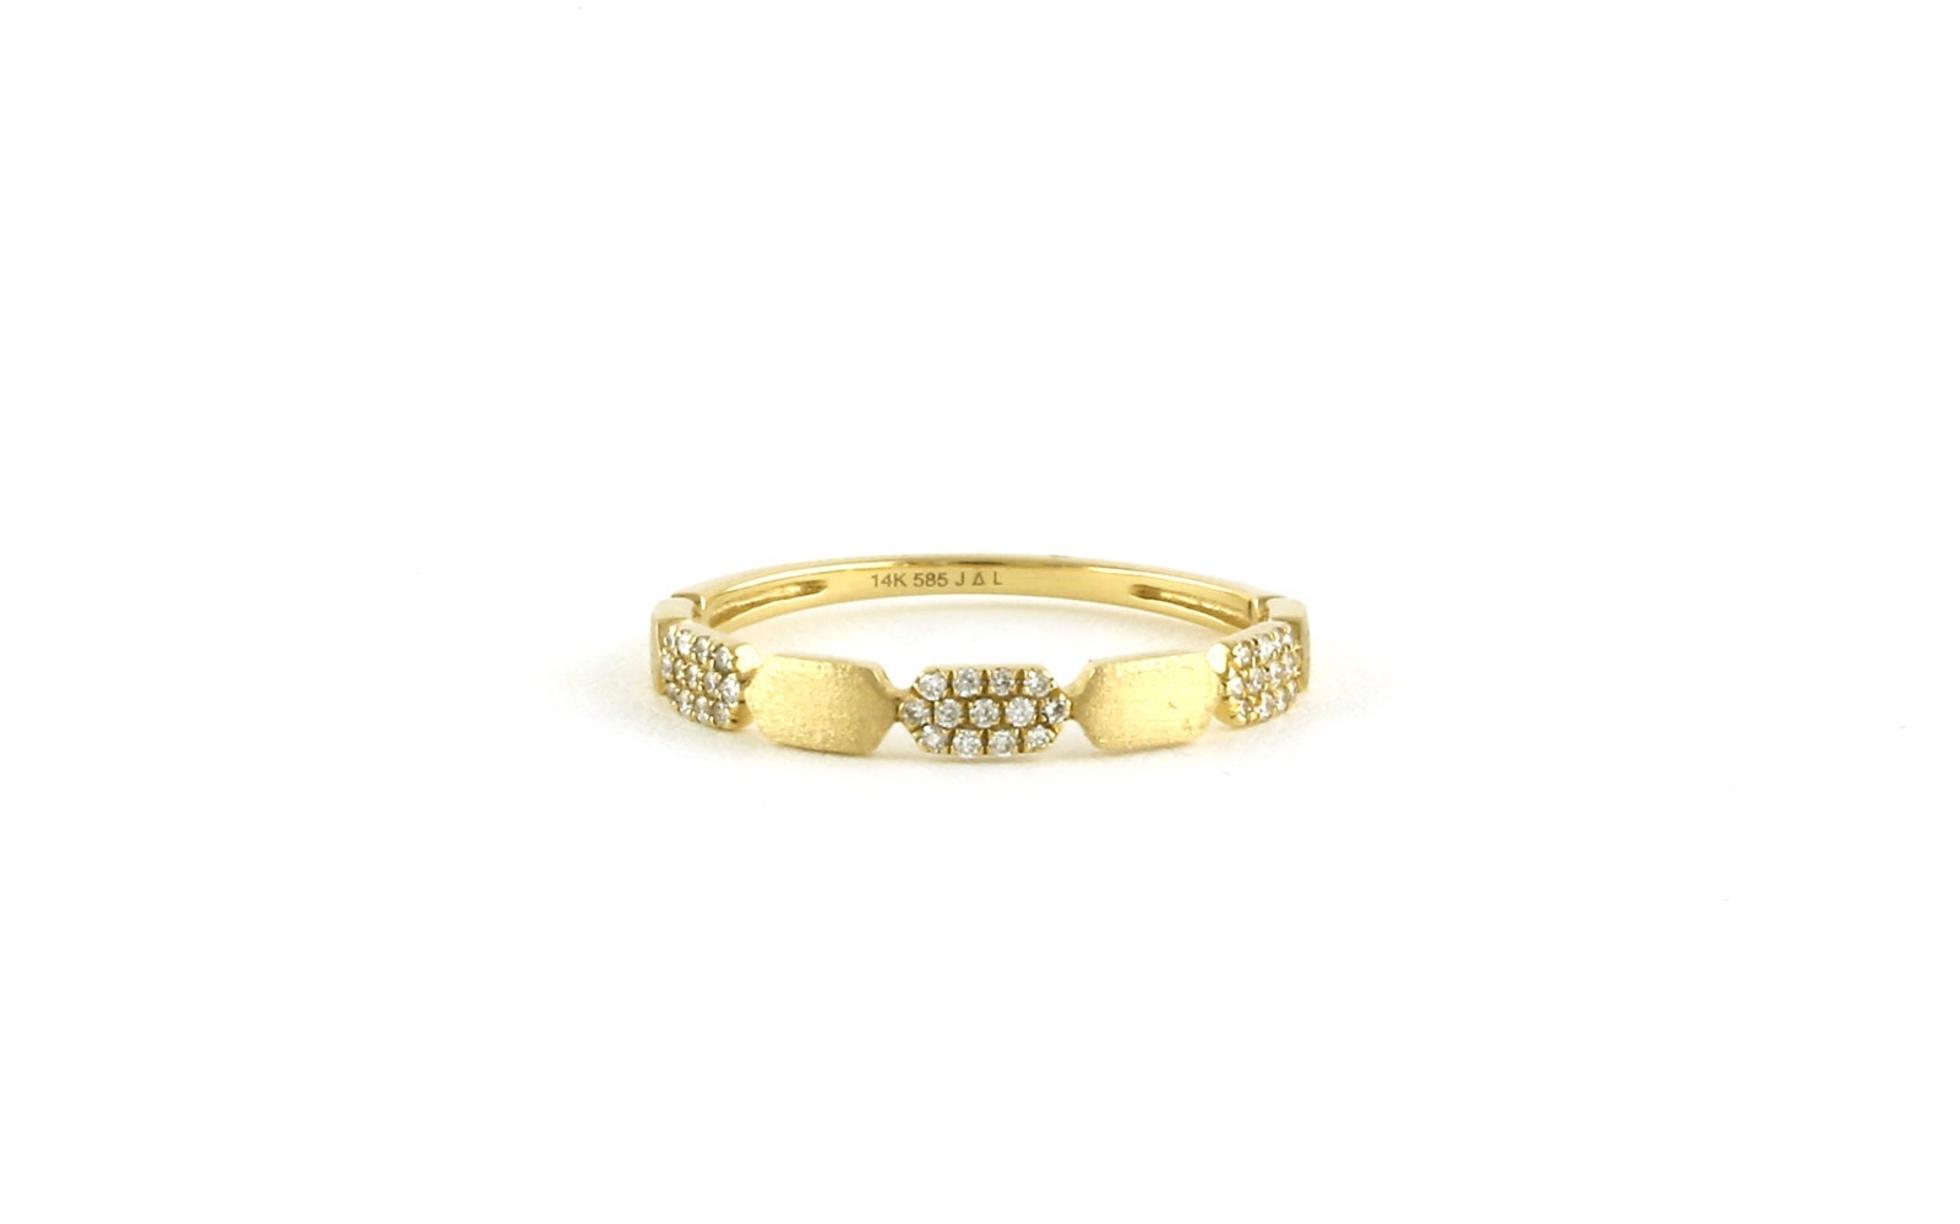 Alternating Pave Diamond Rectangular Band with Satin Finish in Yellow Gold (0.12cts TWT)